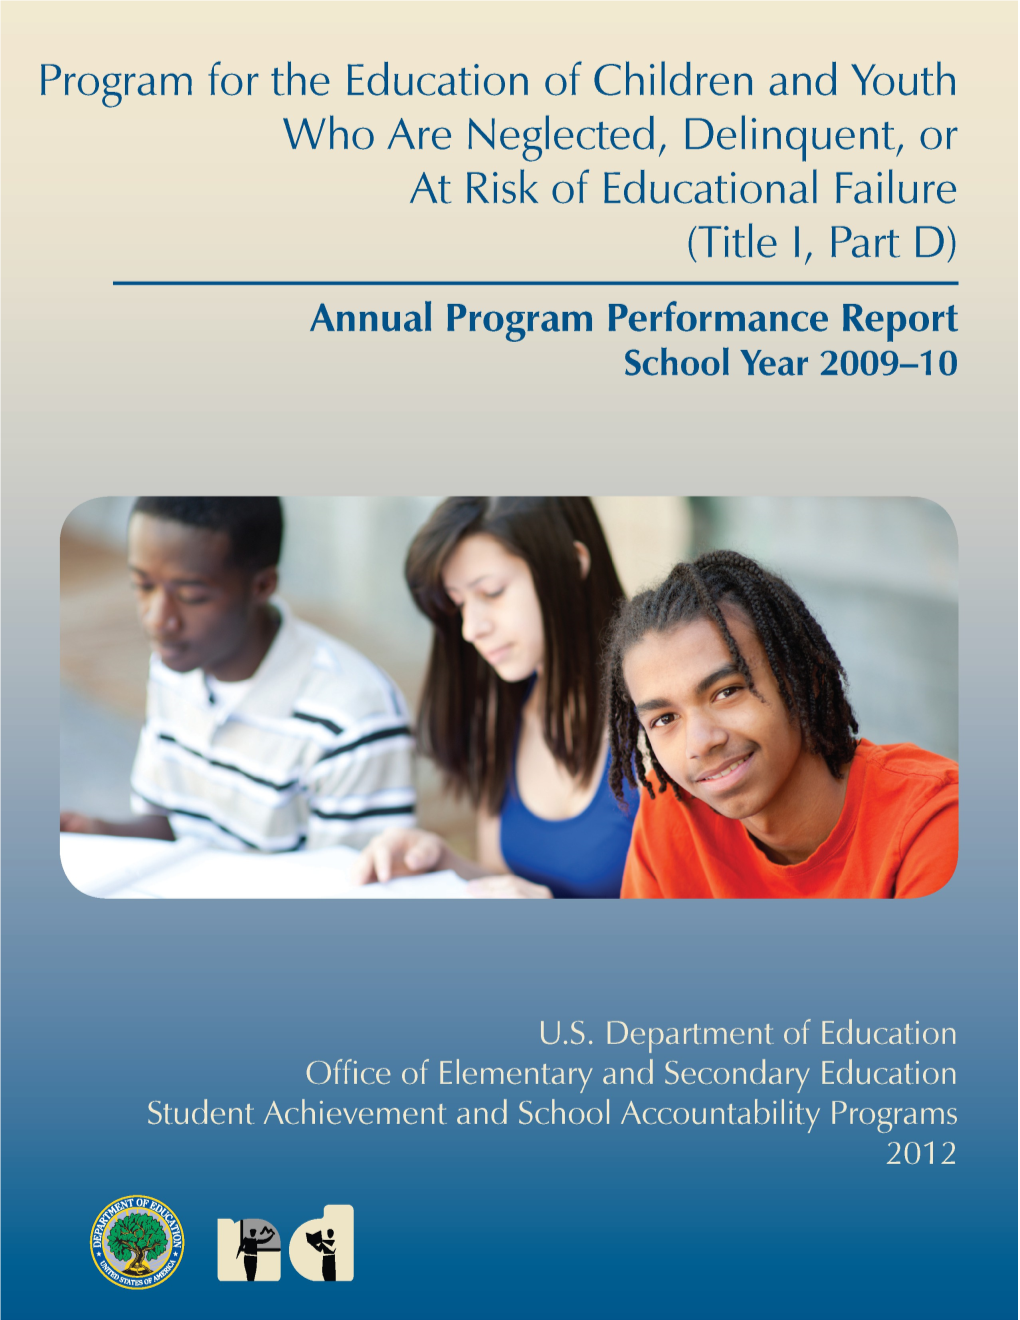 Annual Performance Report for School Year 2009 10: Program for the Education of Children